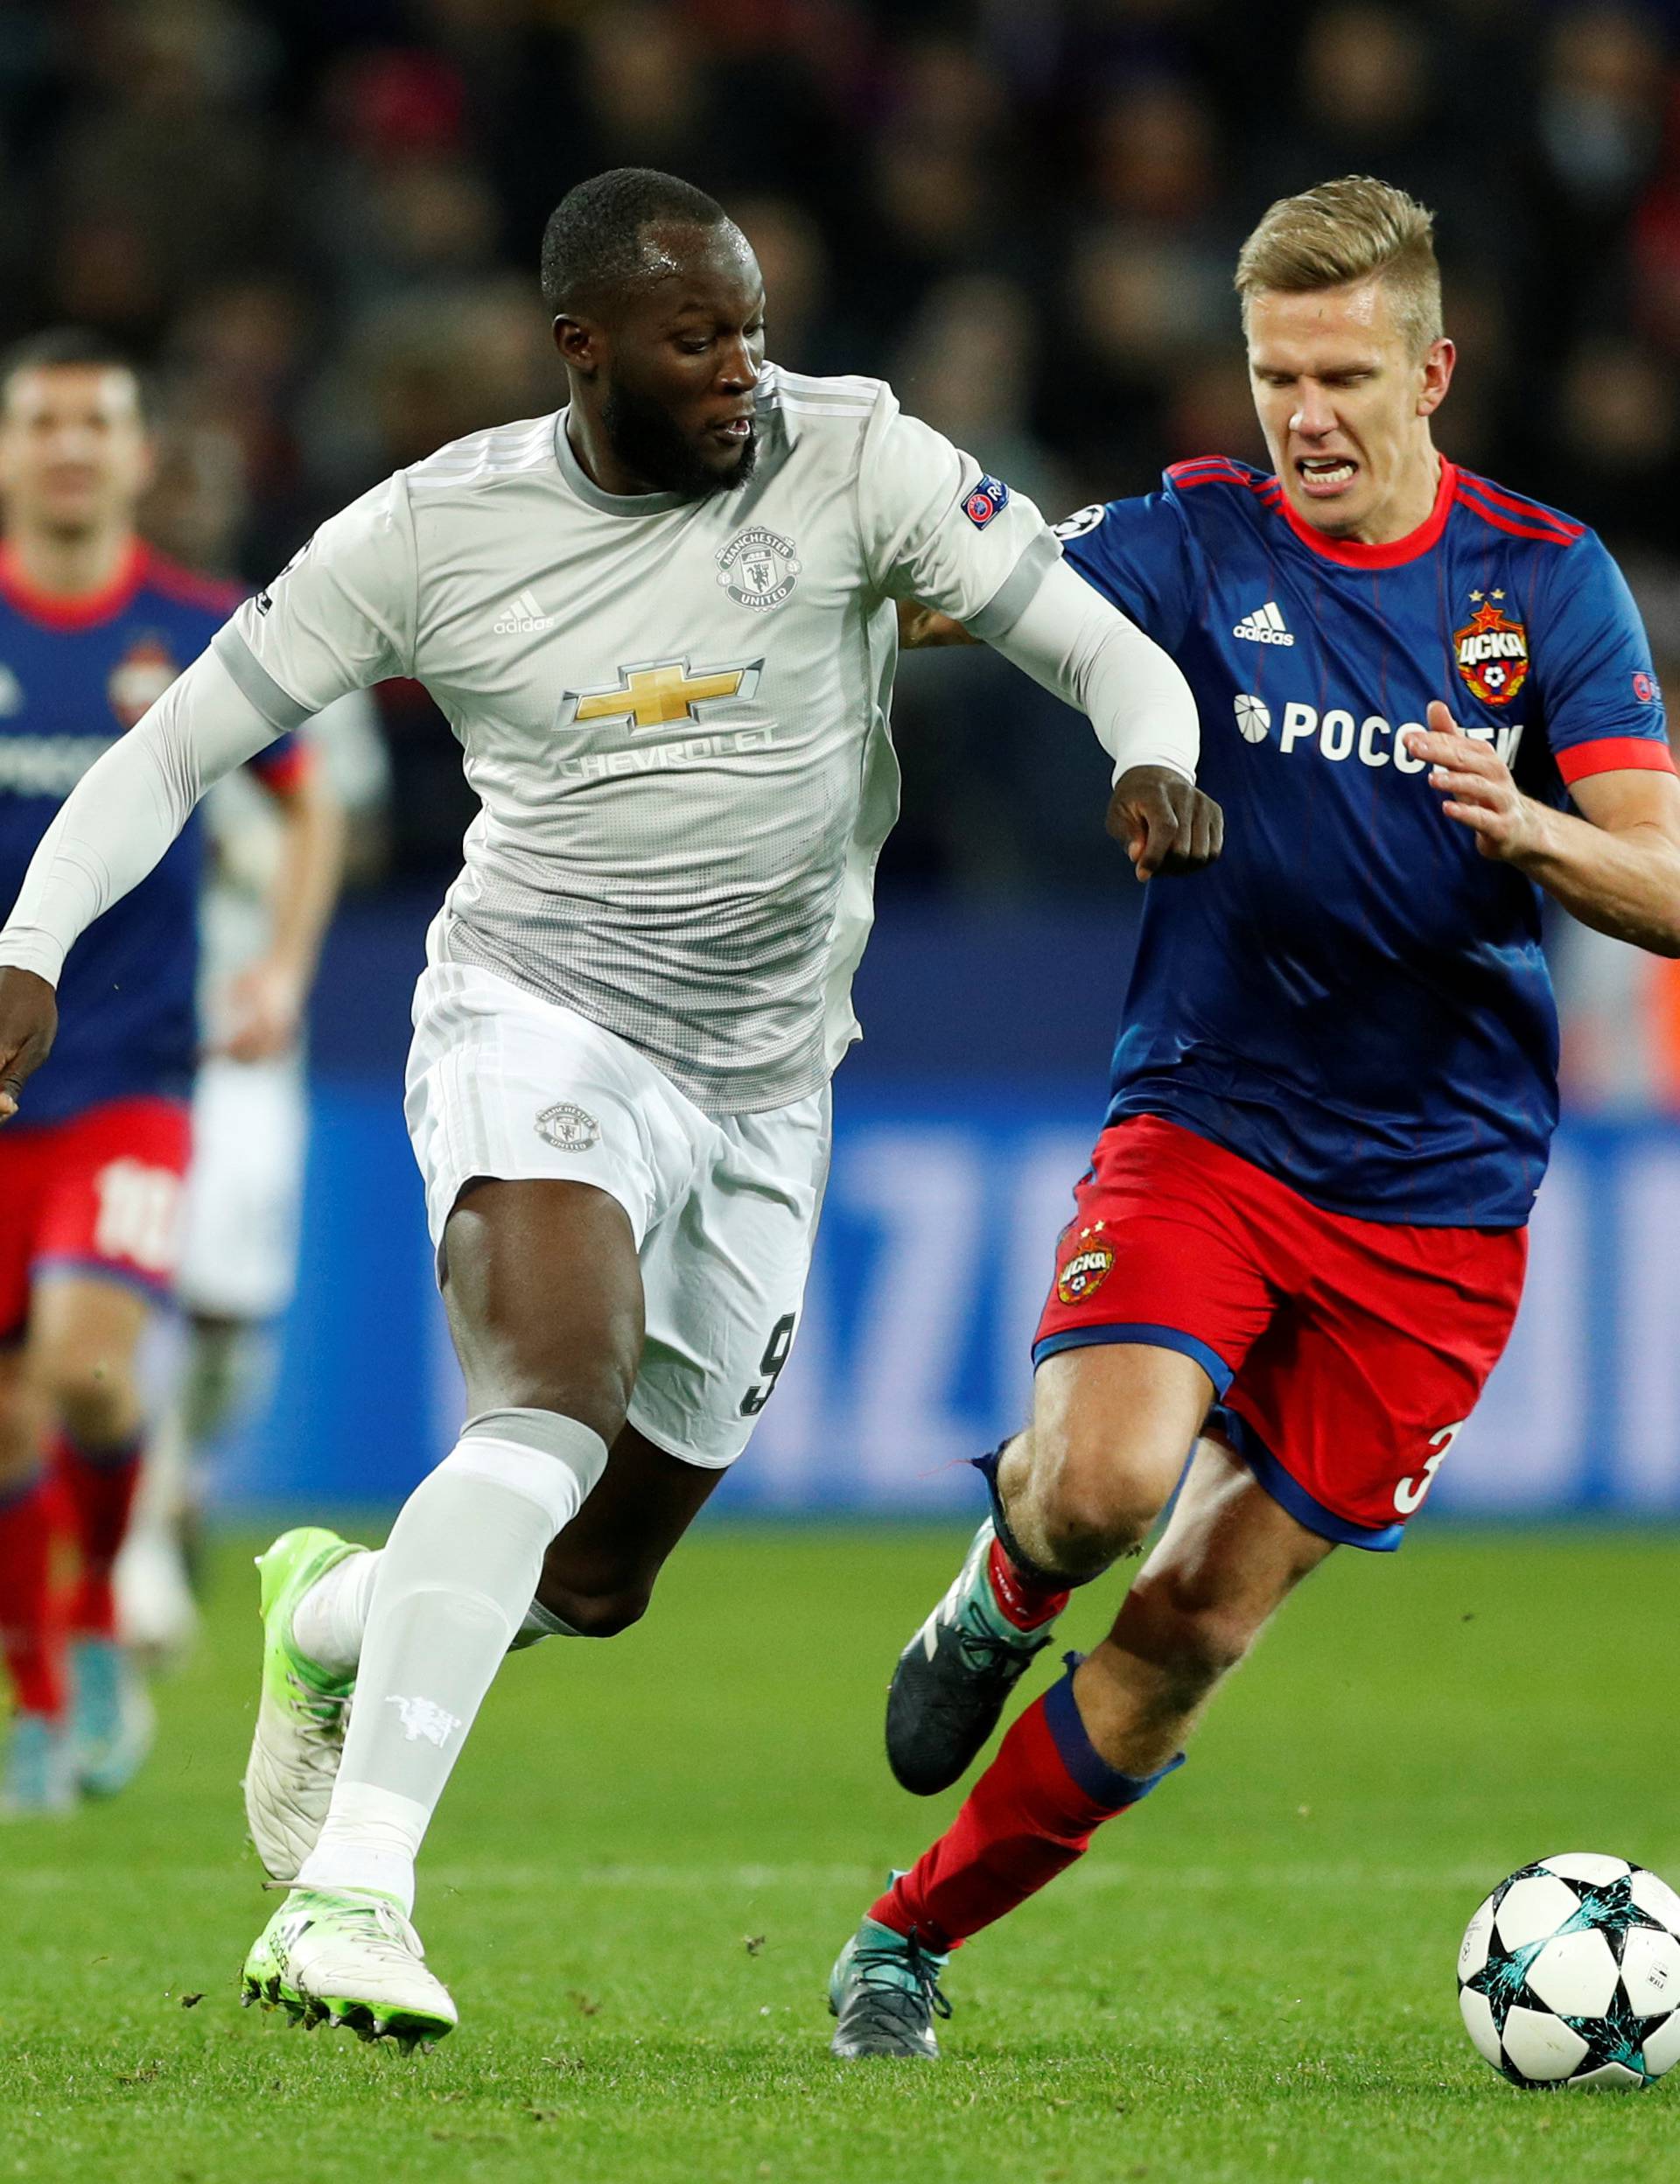 Champions League - CSKA Moscow vs Manchester United